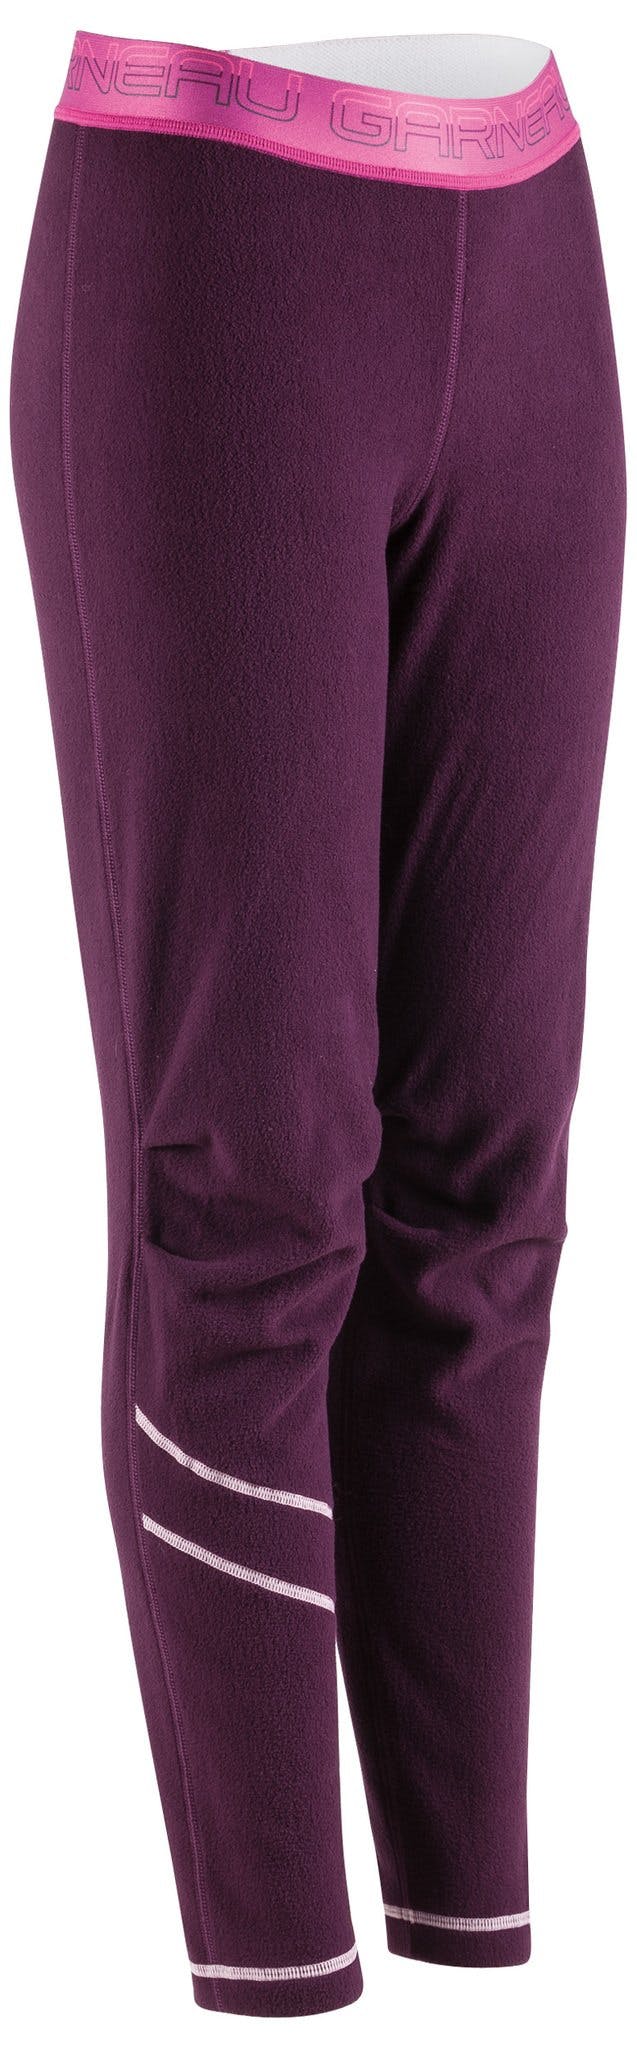 Product image for 4000 Base Layer Pant - Kids